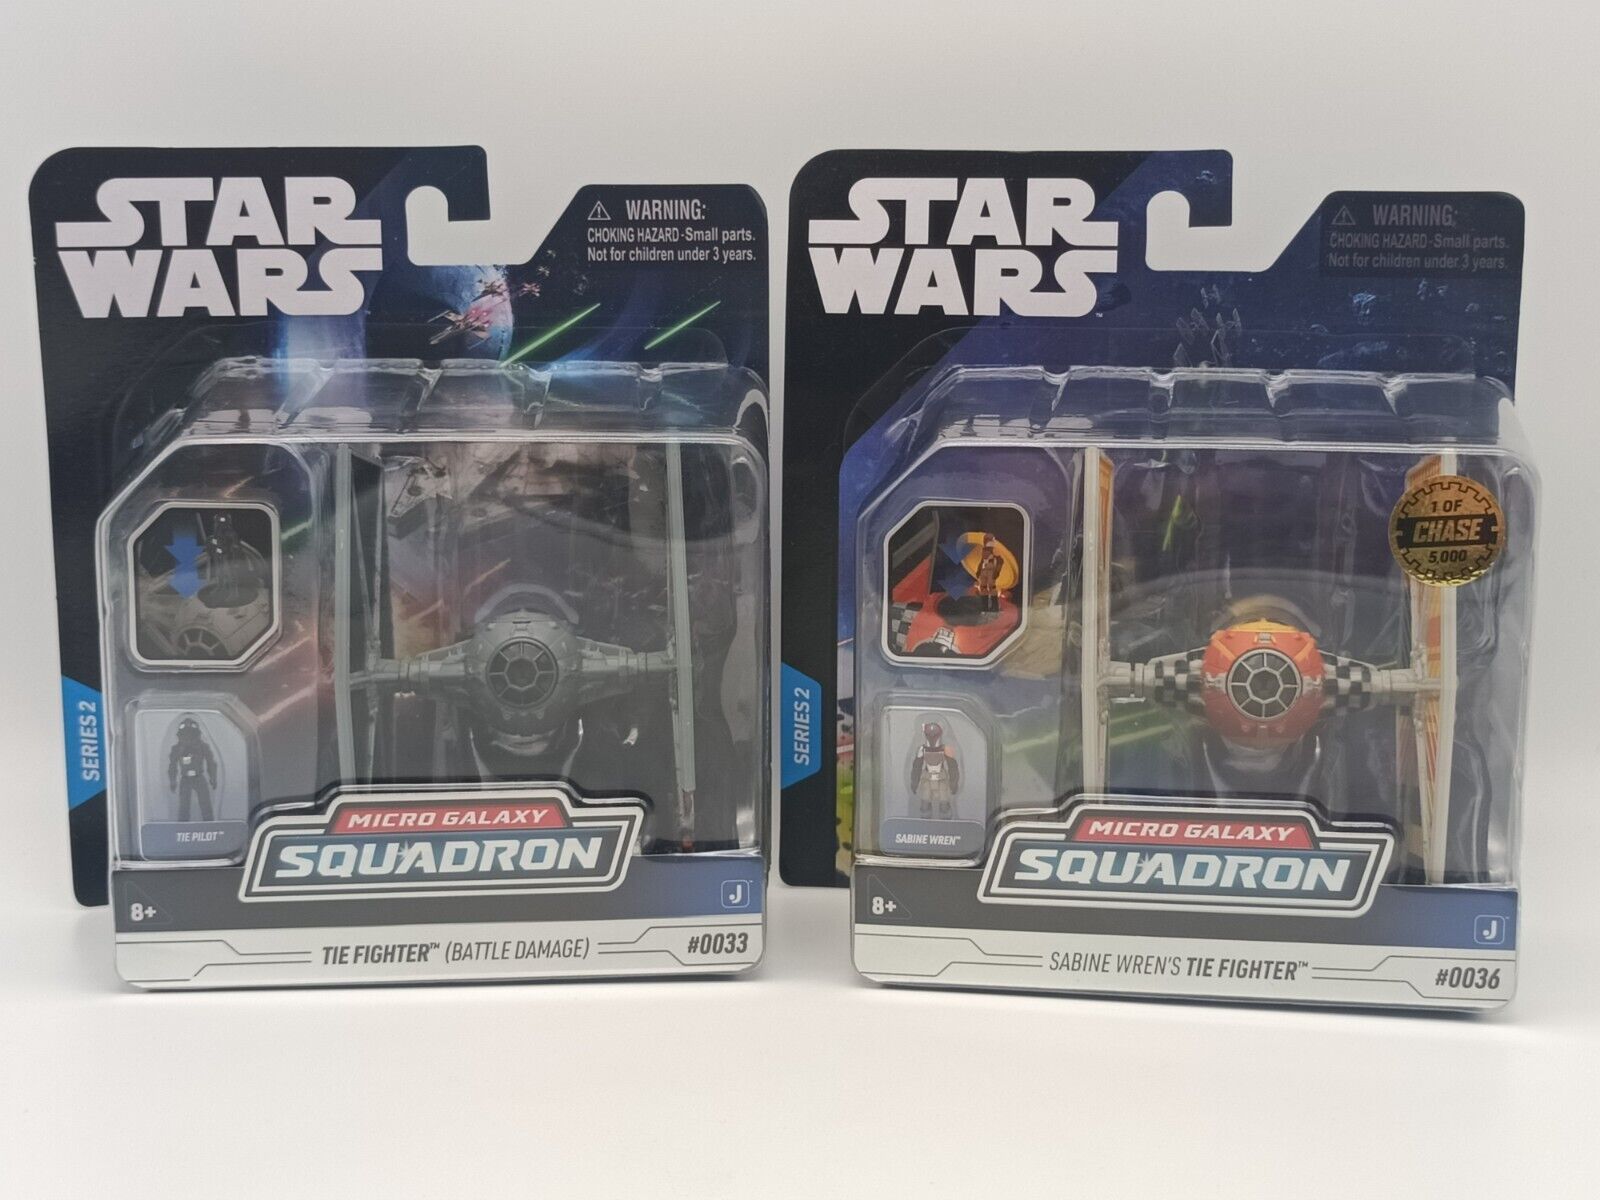 Star Wars Micro Galaxy Squadron Tie fighter and Sabine Wren 1/5000 Chase Lot